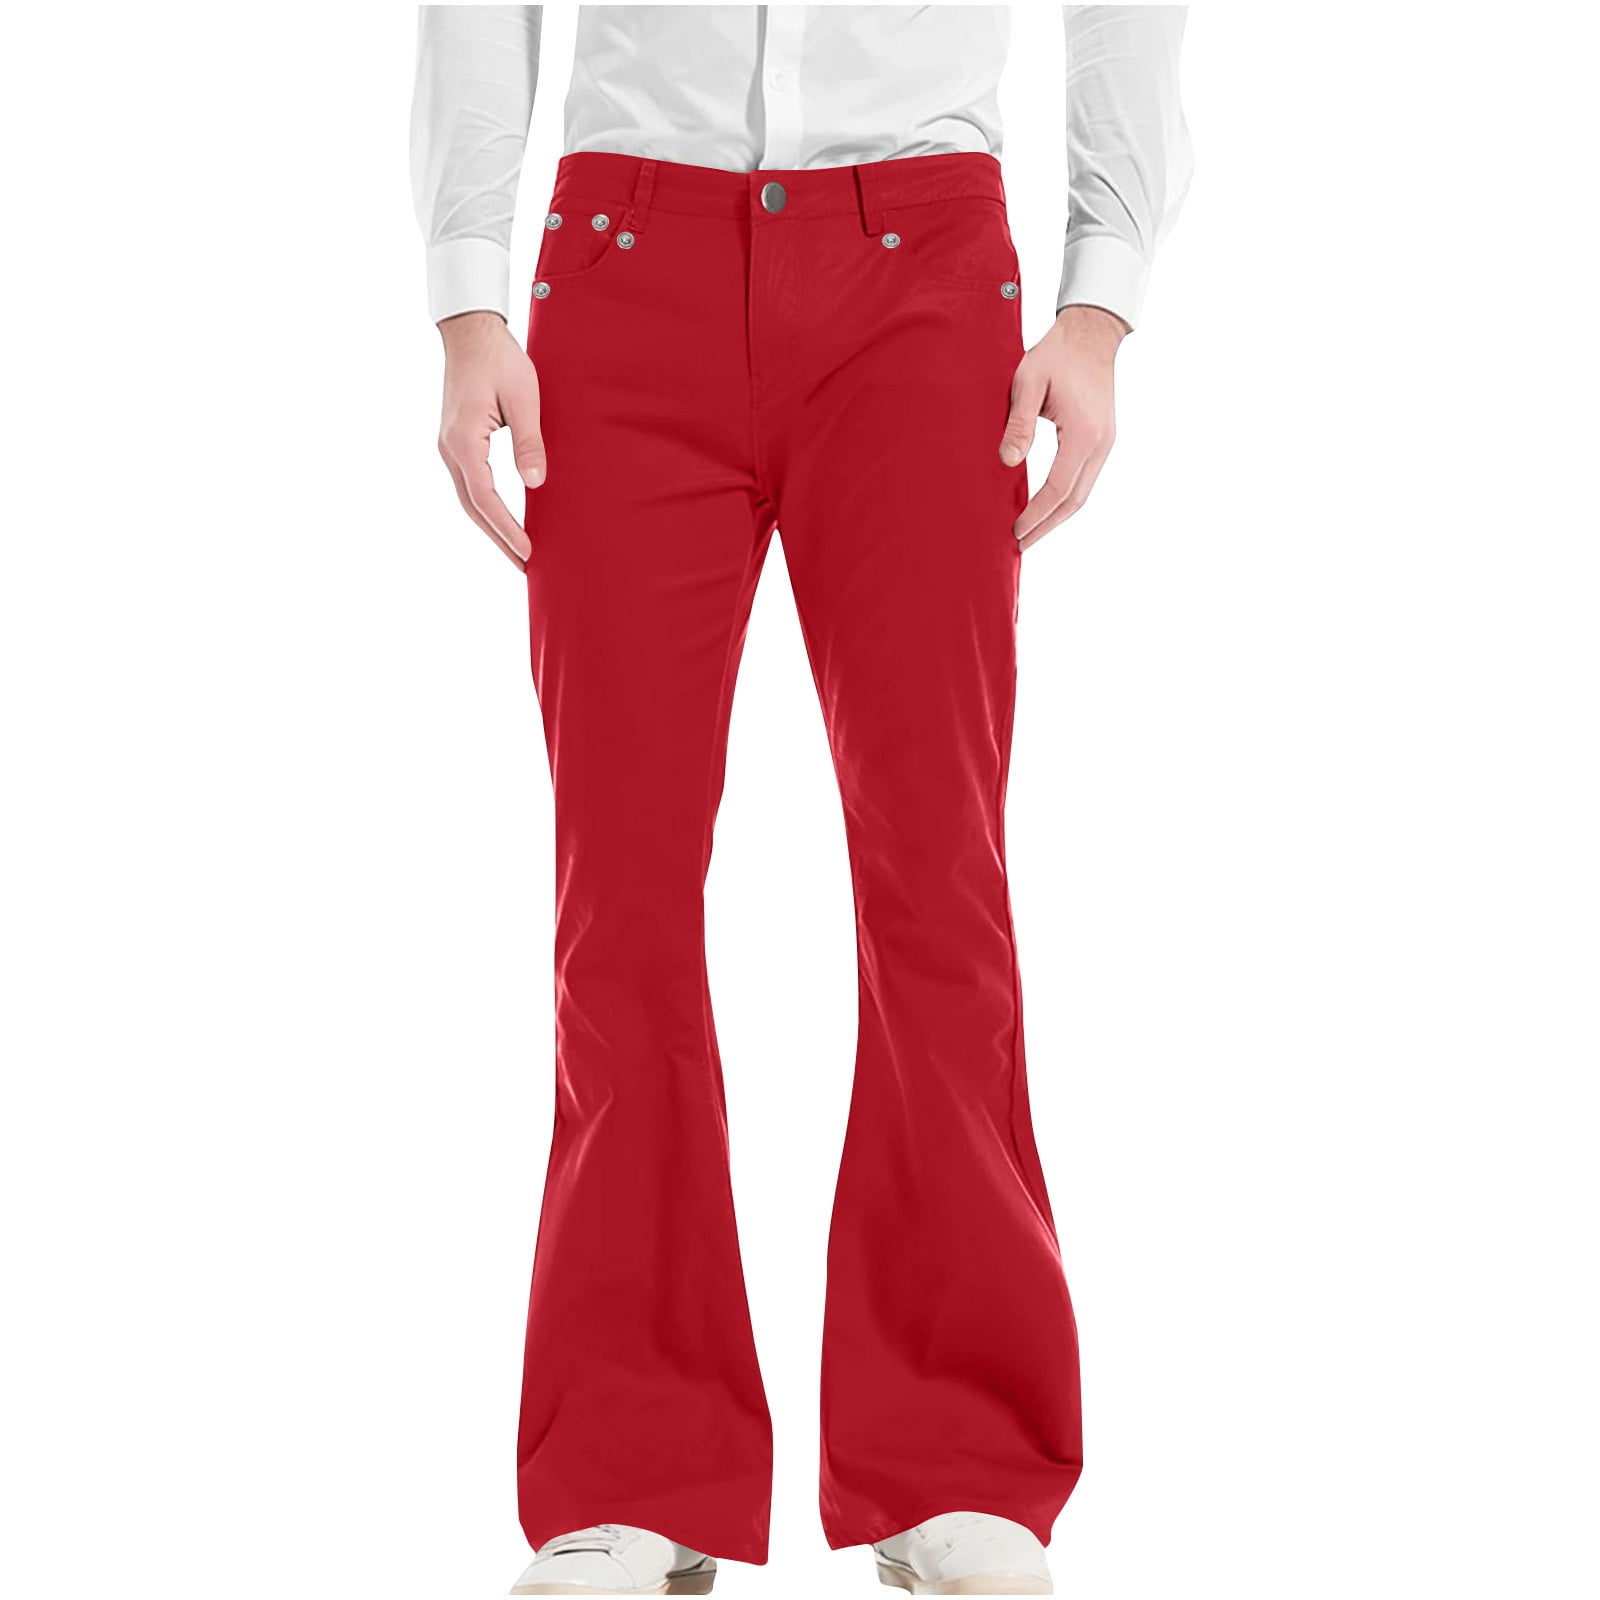 Disco 60s 70s Retro Bell Bottoms Flared Trousers